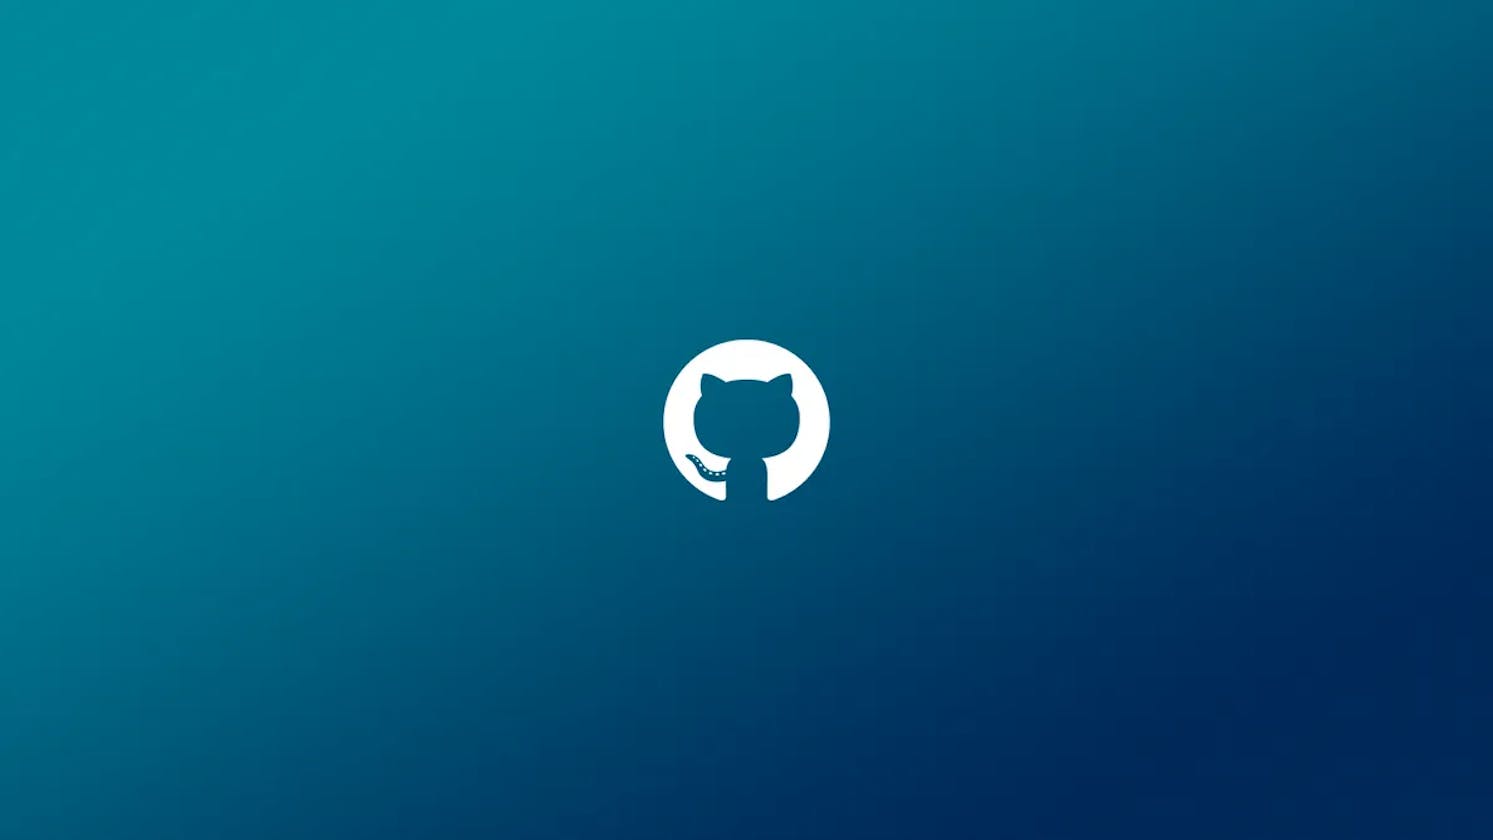 Mastering Tasklist: How to Make the Most of GitHub's Built-in Task Management System!